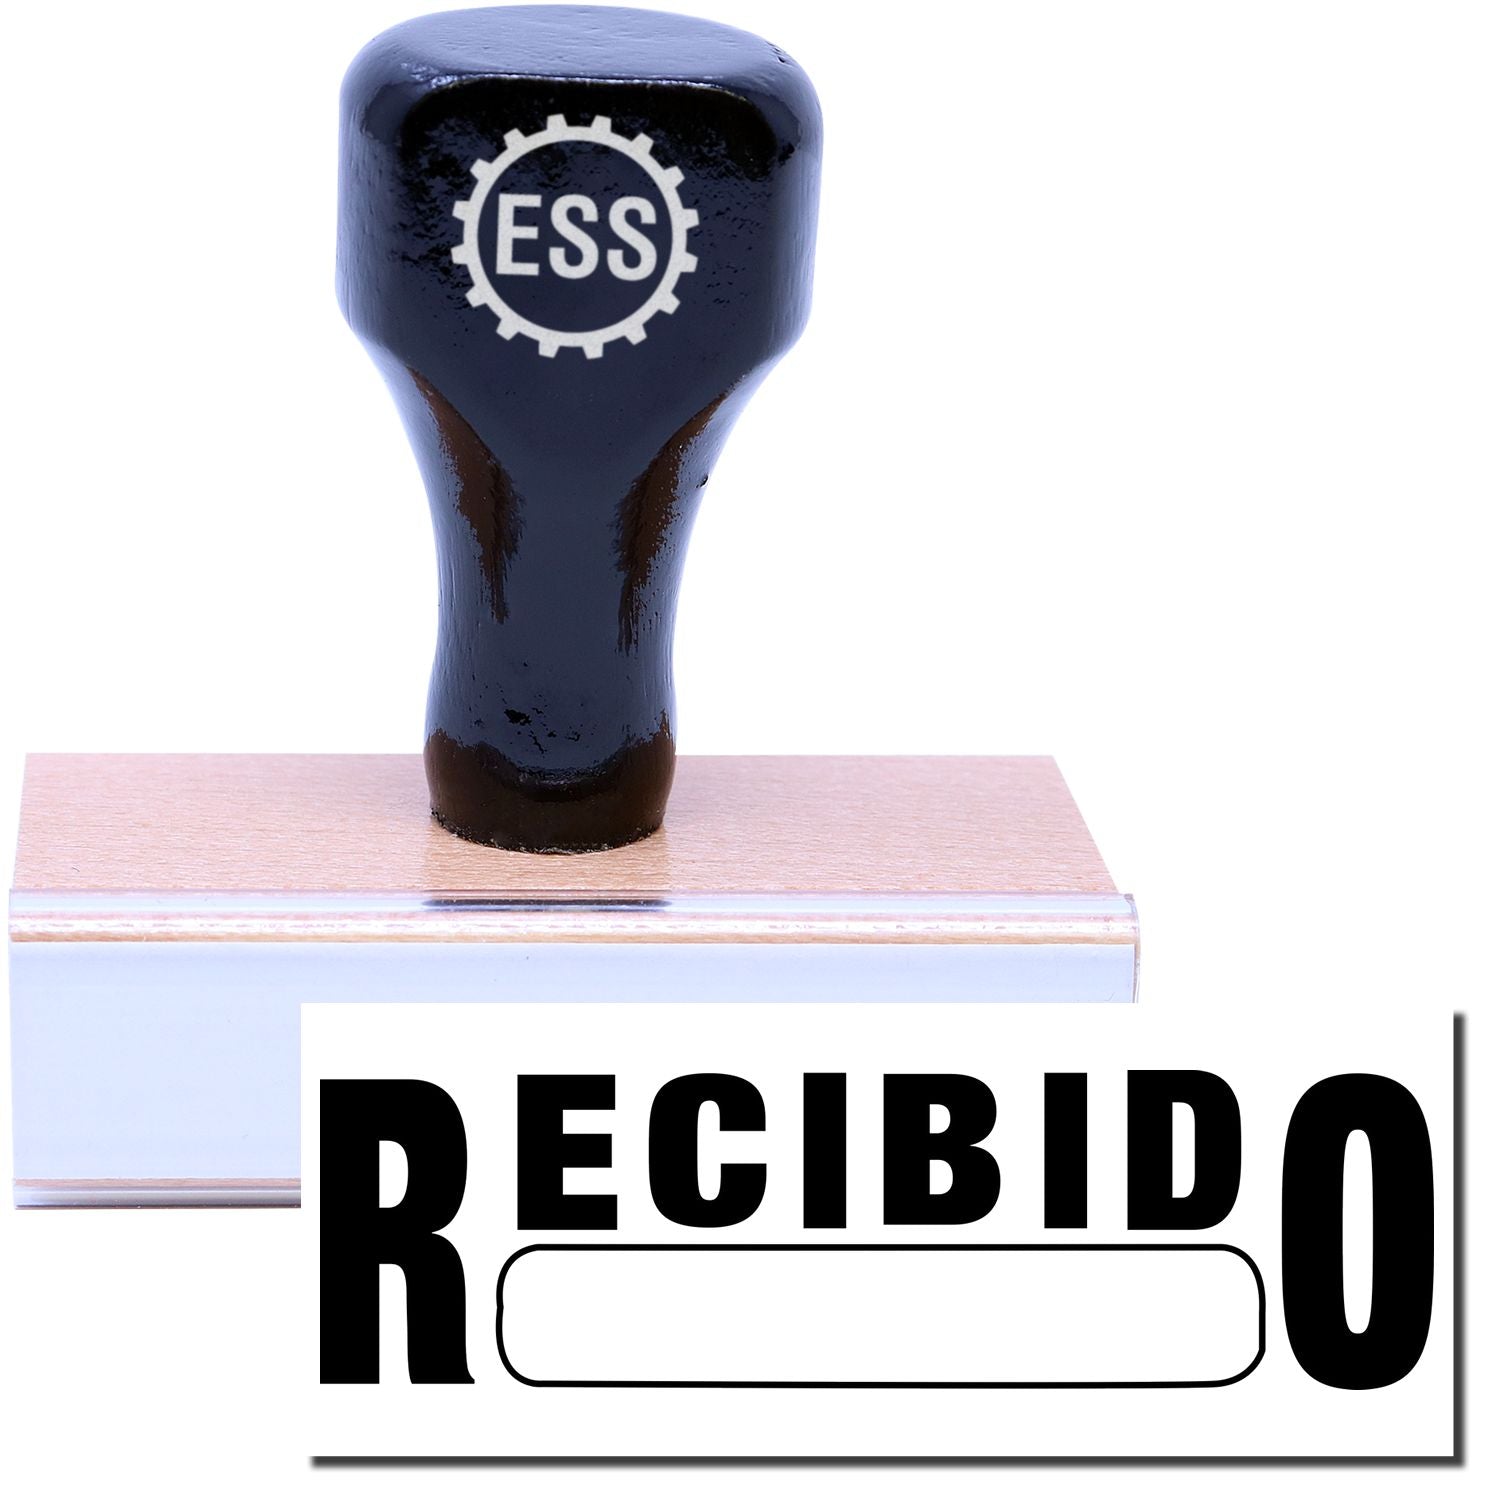 A stock office rubber stamp with a stamped image showing how the text "RECIBIDO" with a box is displayed after stamping.